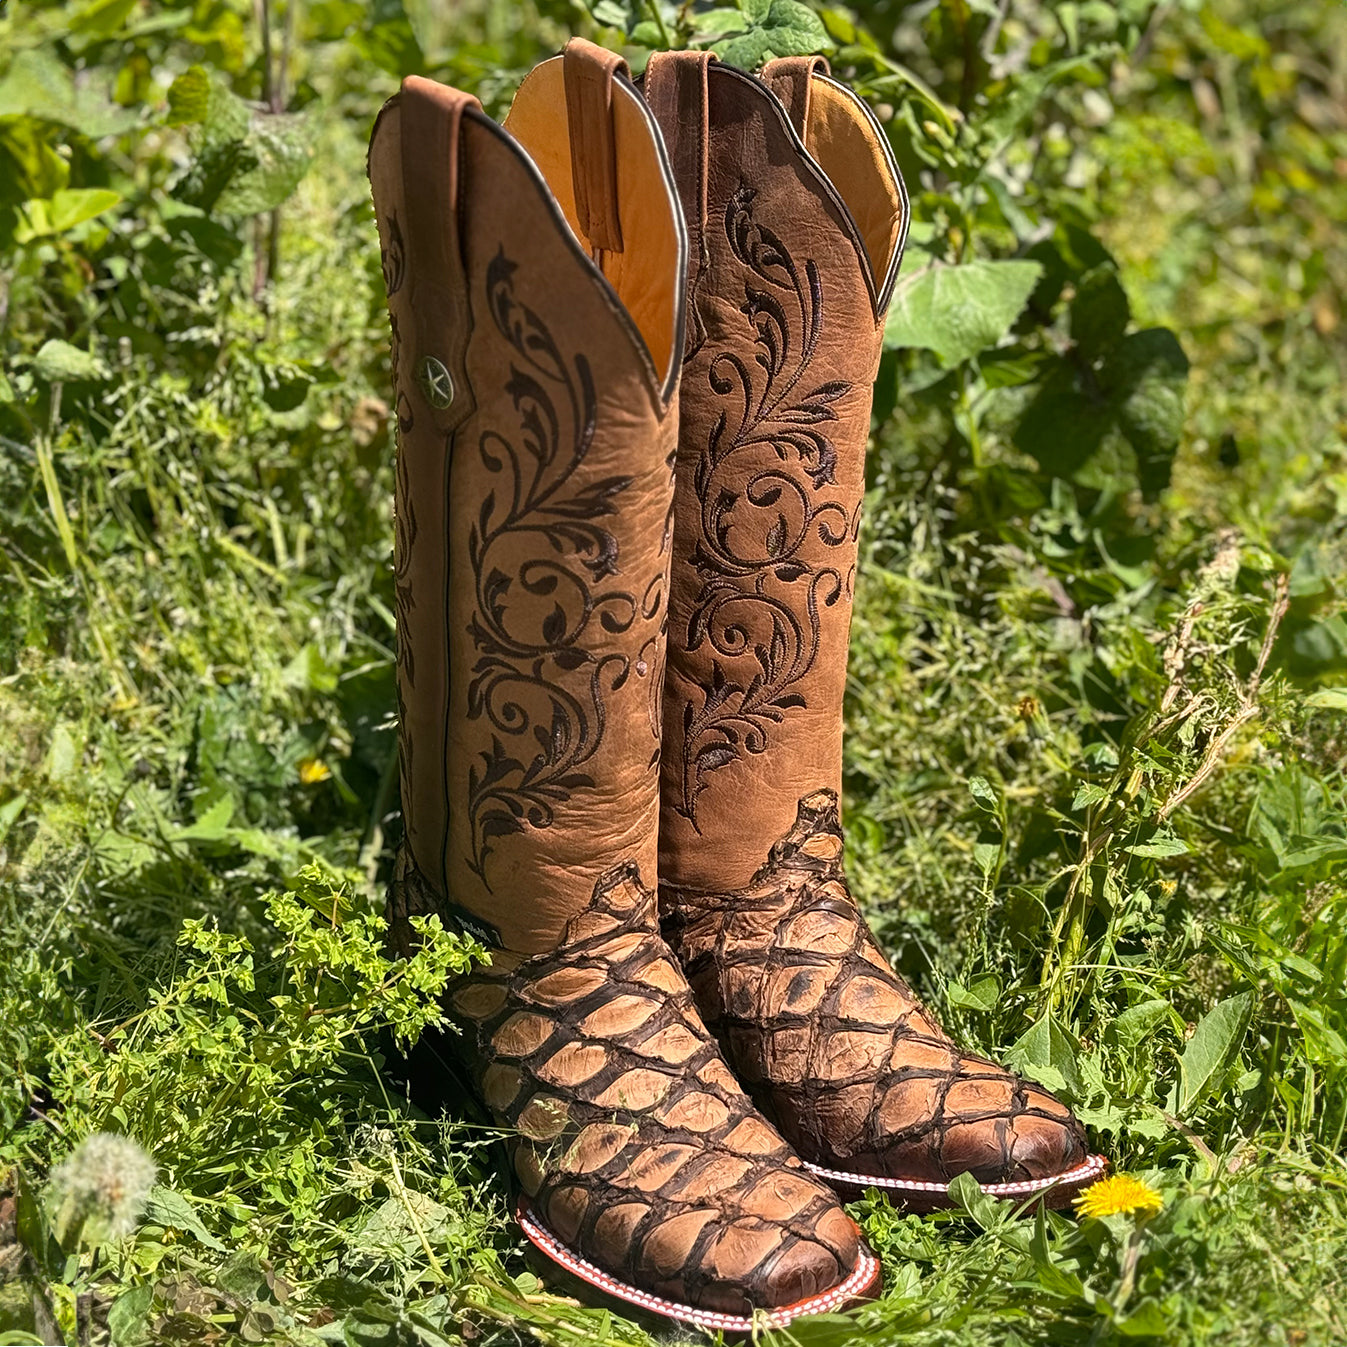 Womens Cowboy Boots & Cowgirl Boots | Vaquero Boots